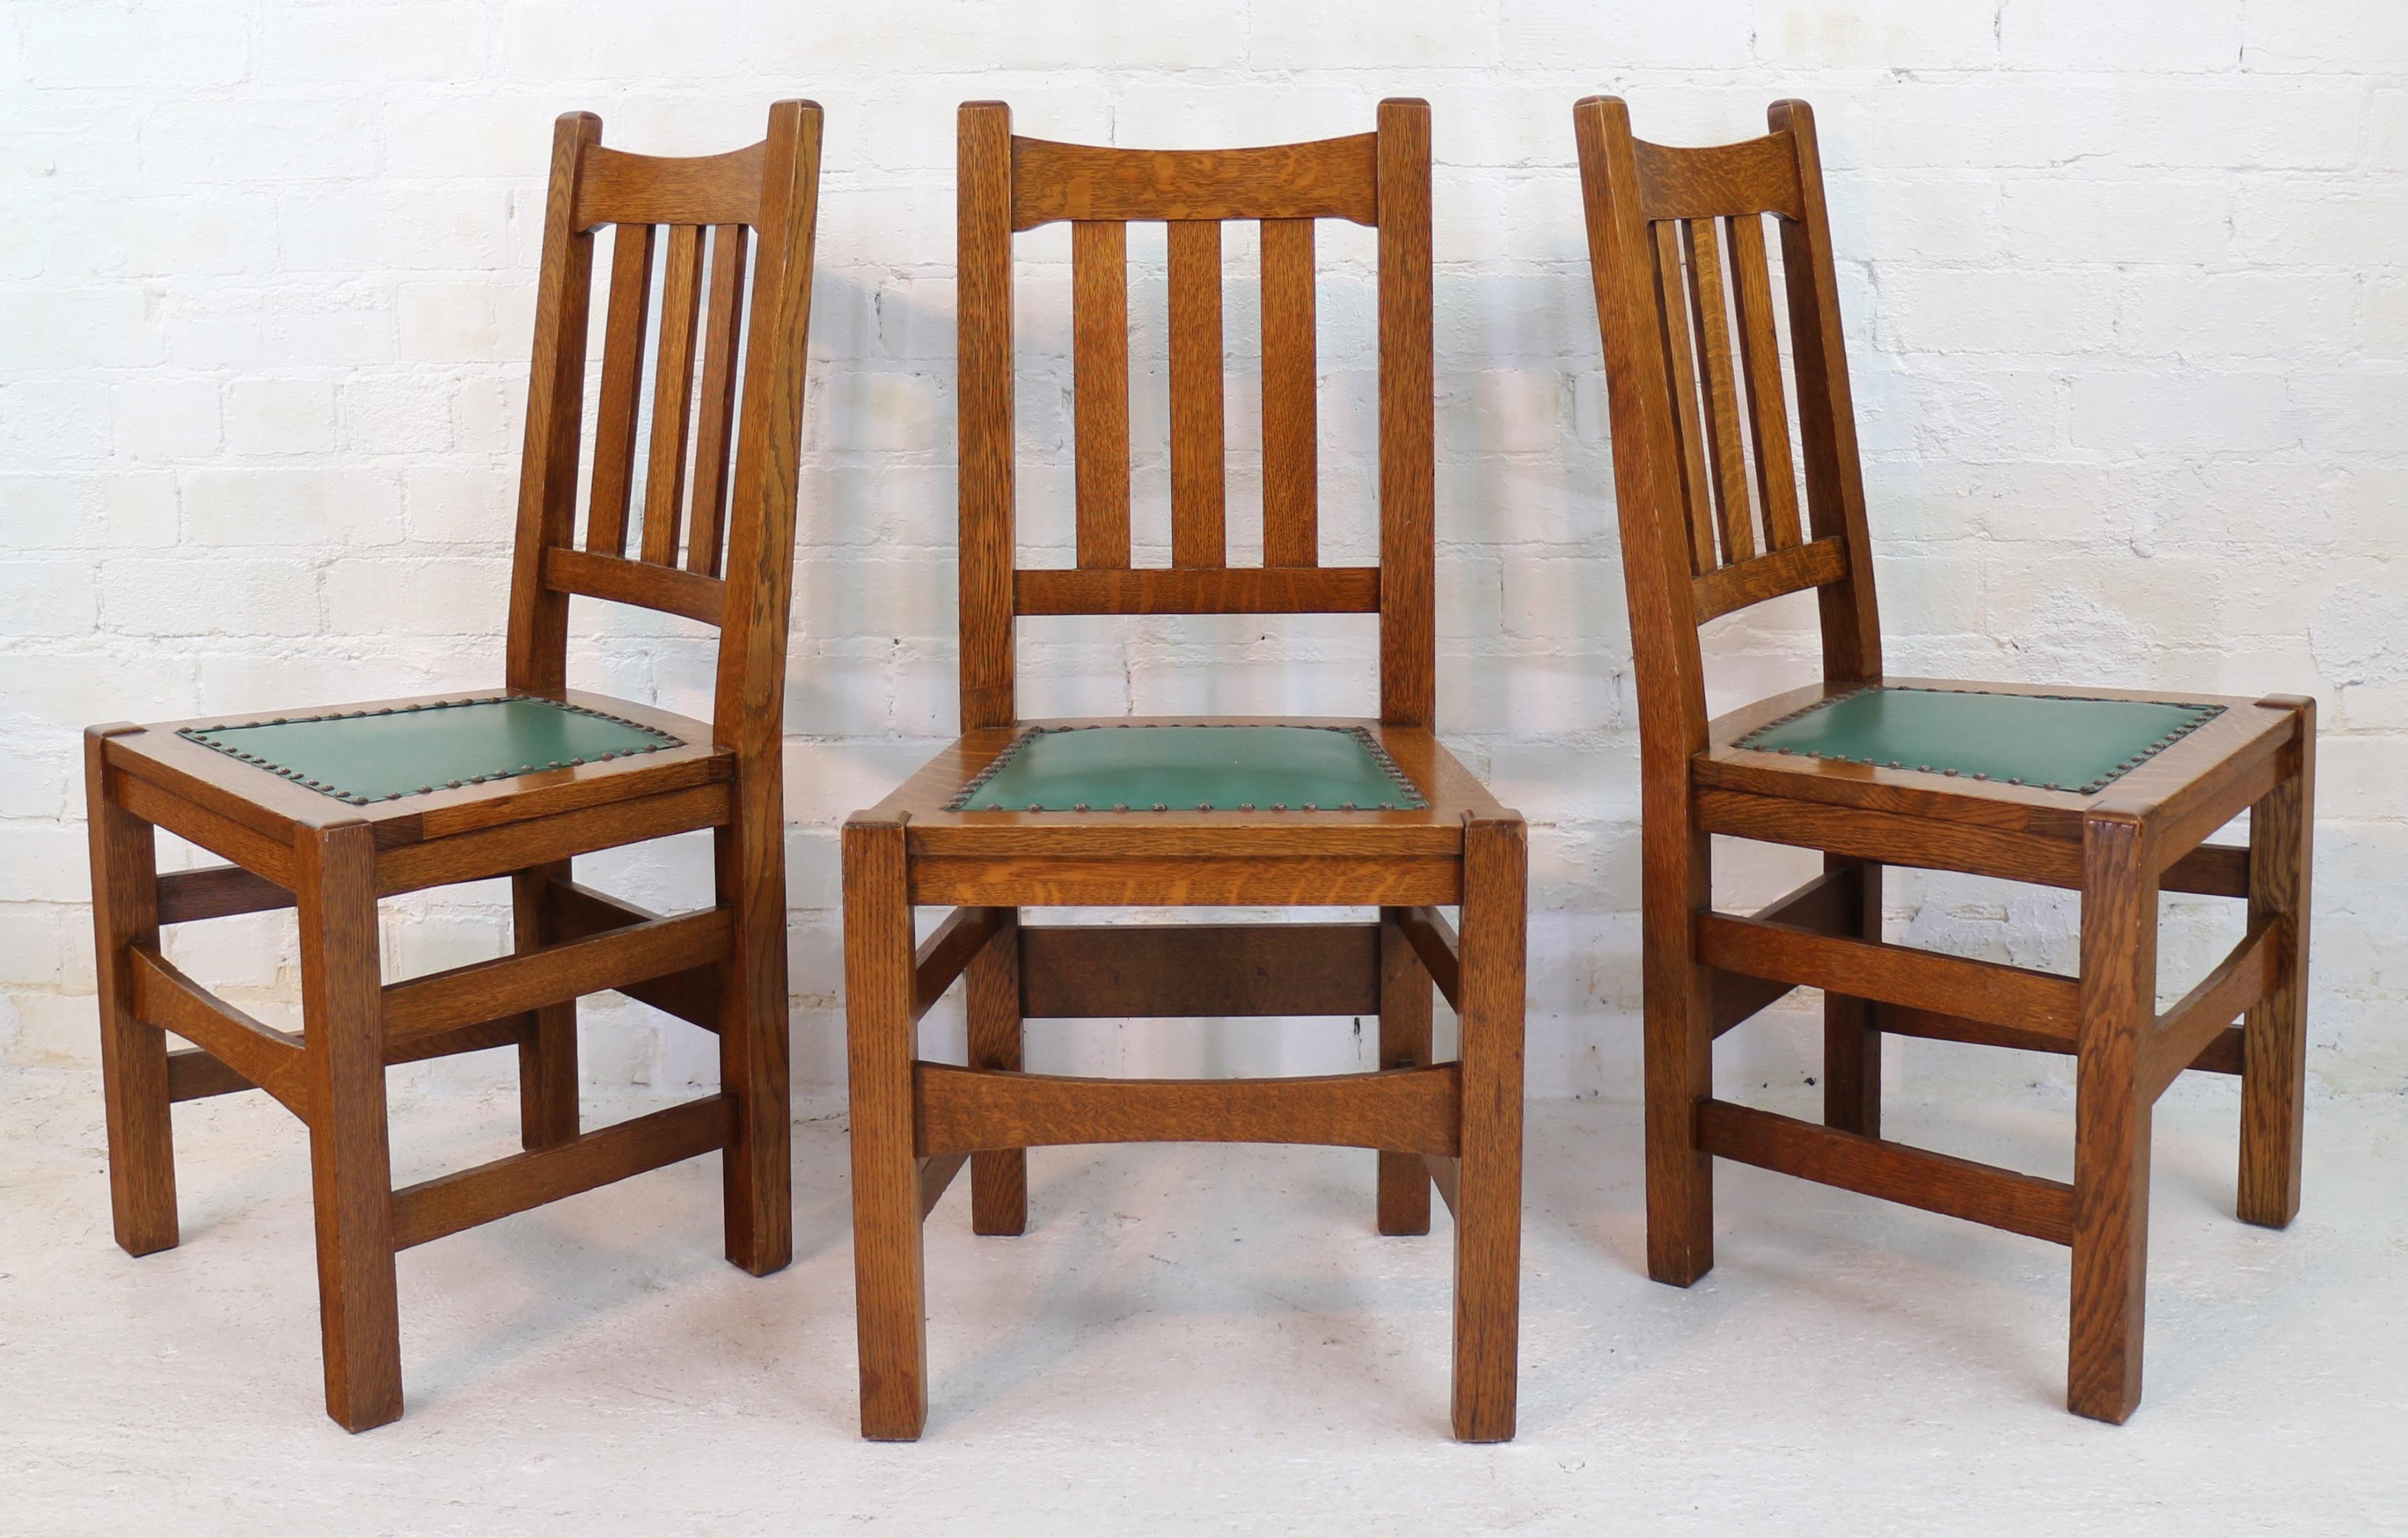 Early 20th Century Set of 8 American Stickley Arts & Crafts Mission Oak Dining Chairs, circa 1900